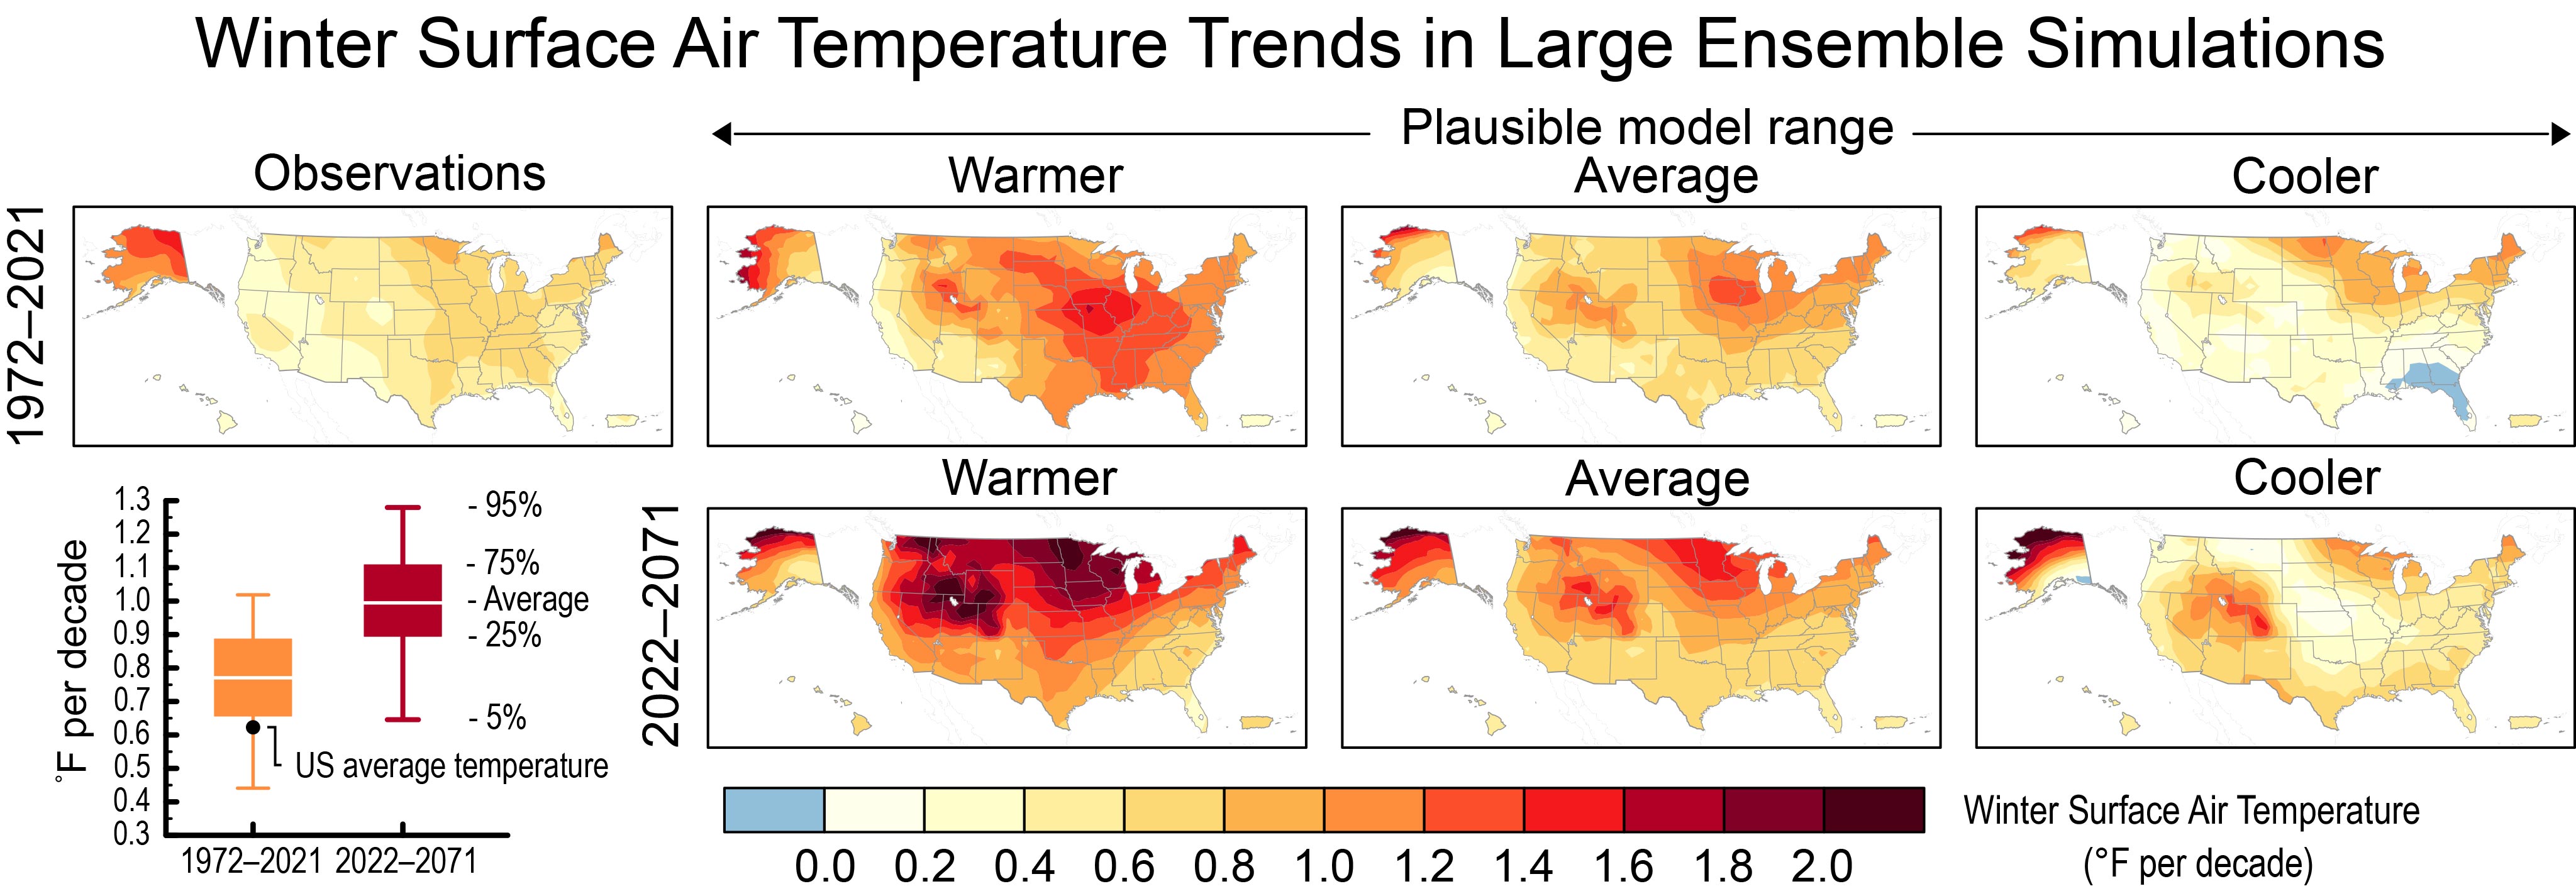 Winter Surface Air Temperature Trends in Large Ensemble Simulations